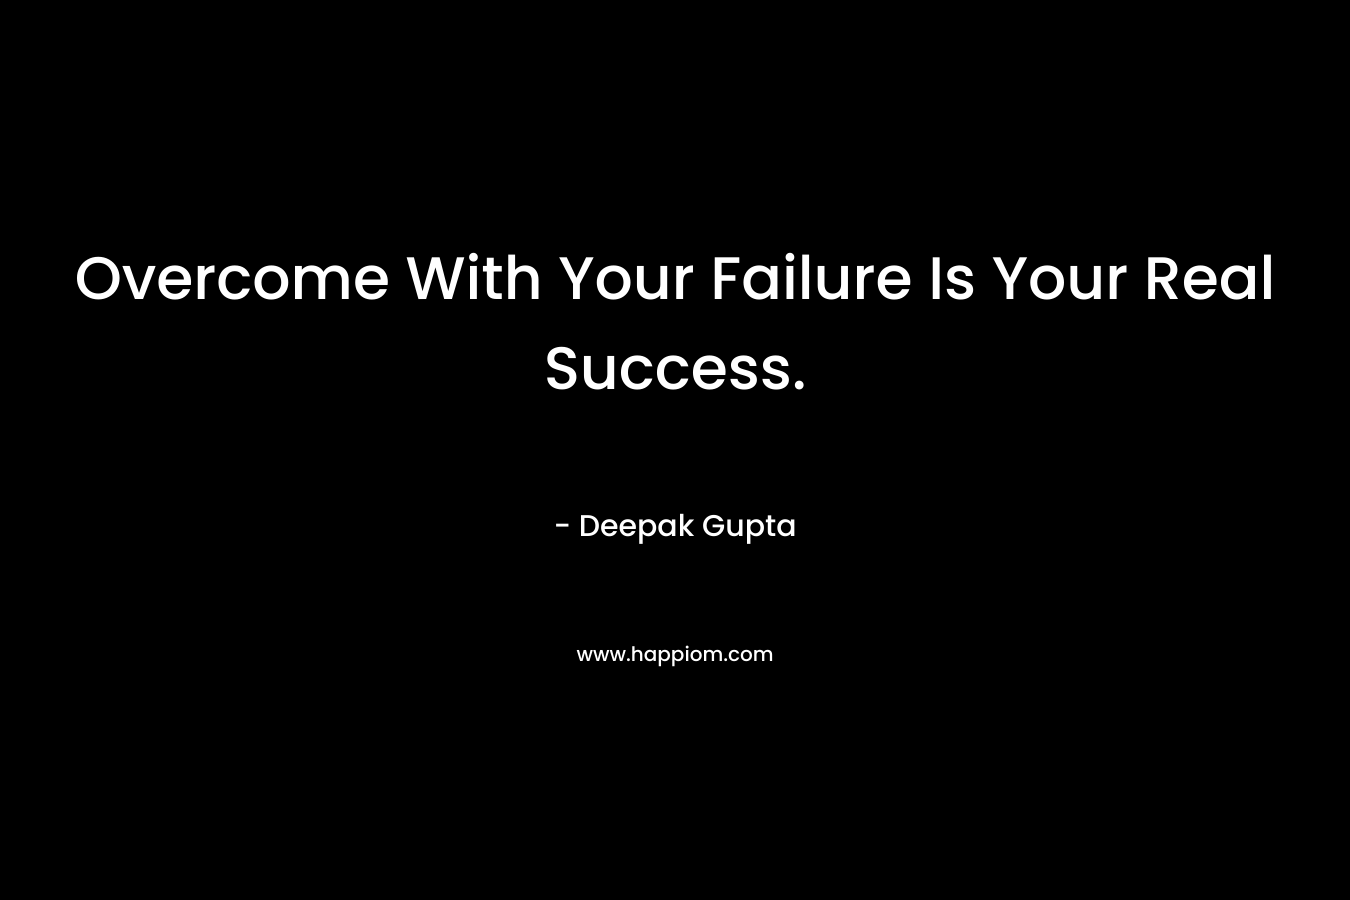 Overcome With Your Failure Is Your Real Success. – Deepak Gupta